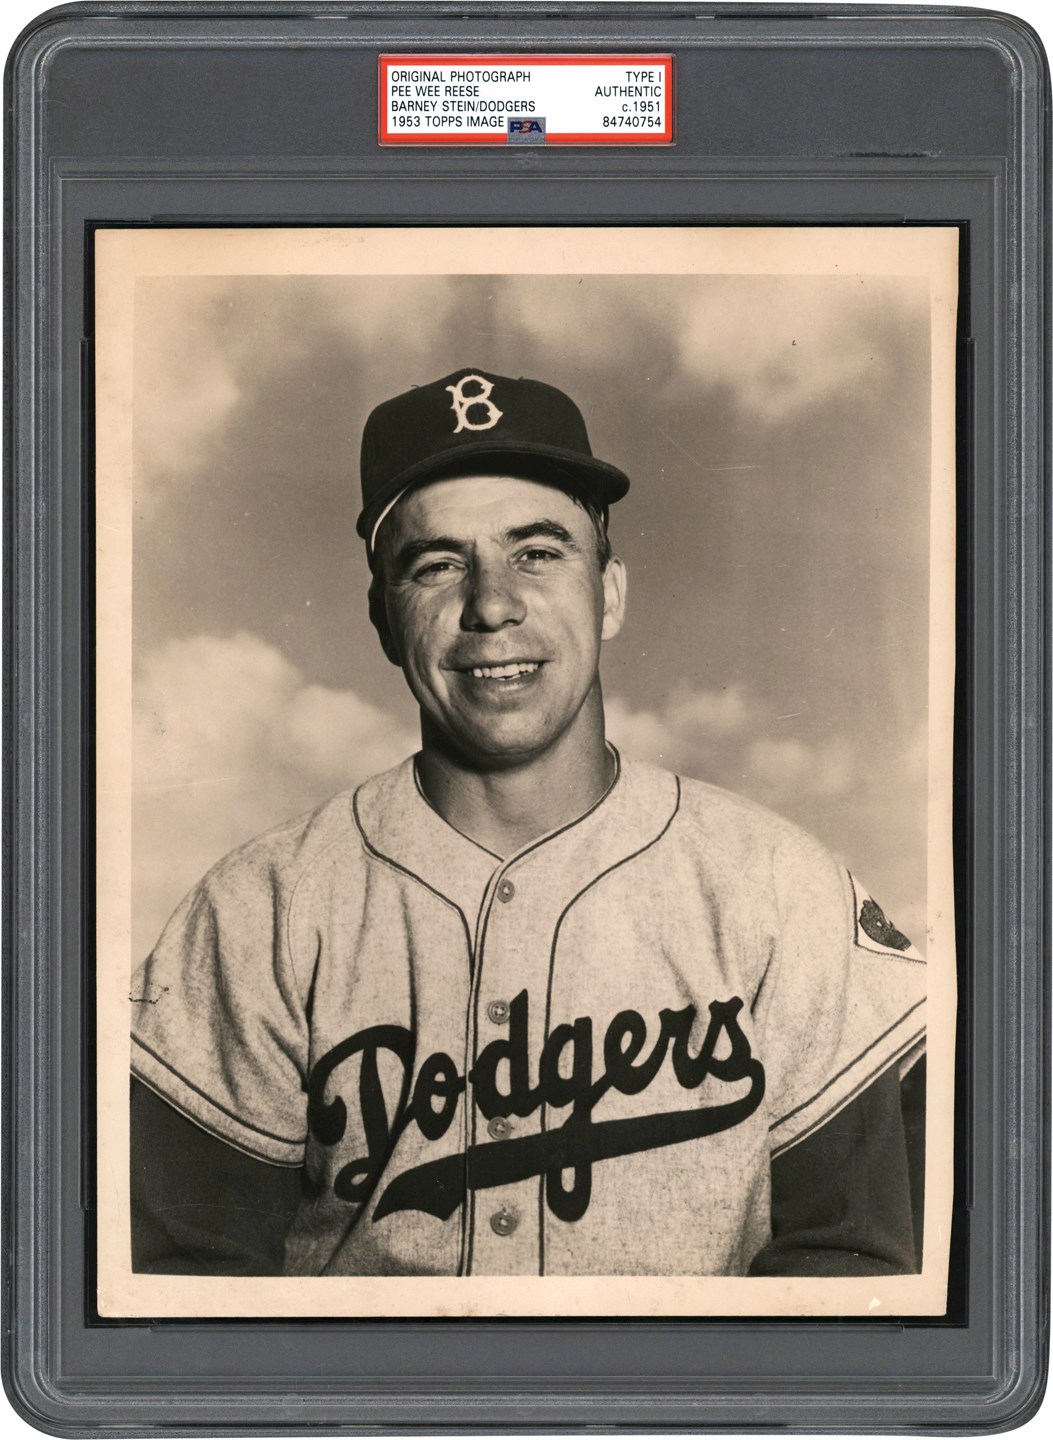 - Pee Wee Reese Photograph Used for 1953 Topps Baseball Card (PSA Type I)